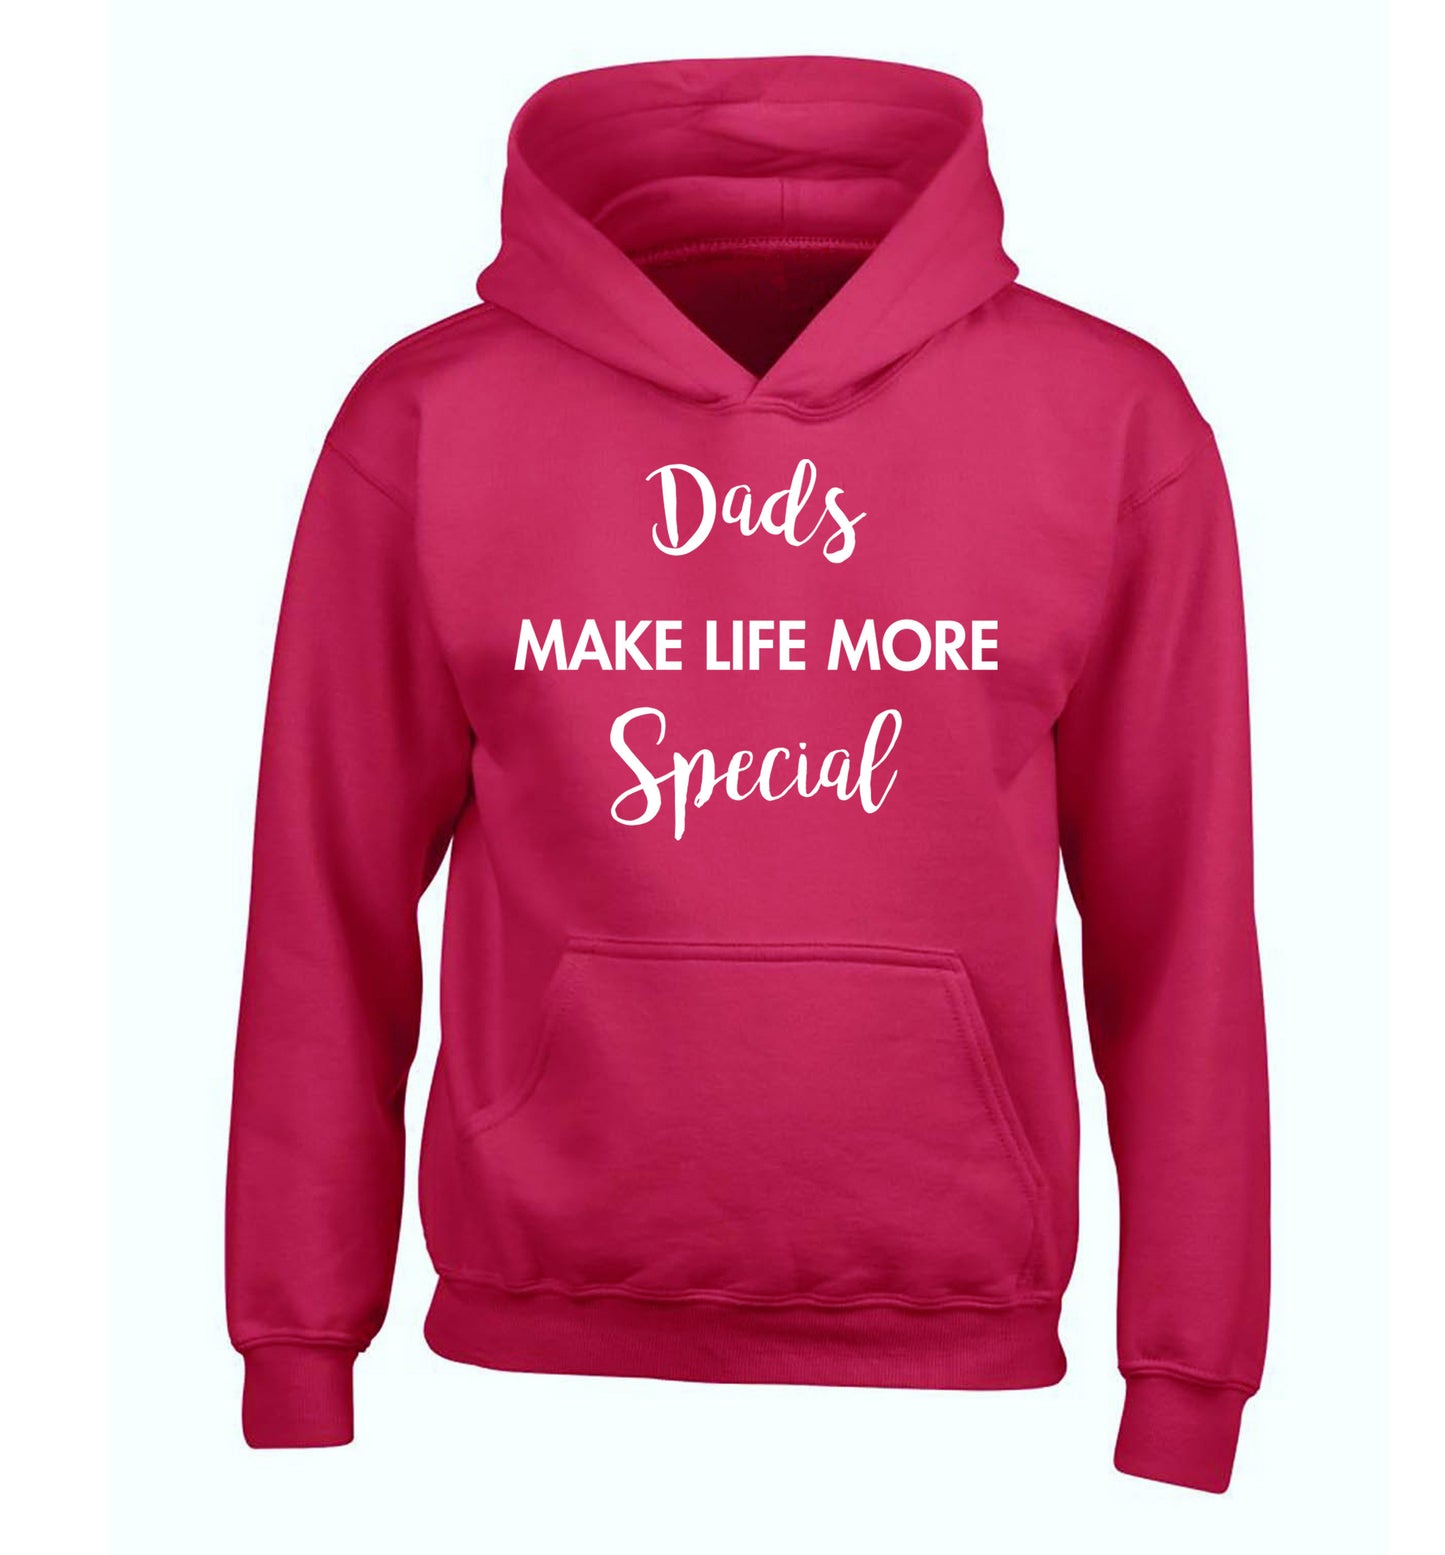 Dads make life more special children's pink hoodie 12-14 Years